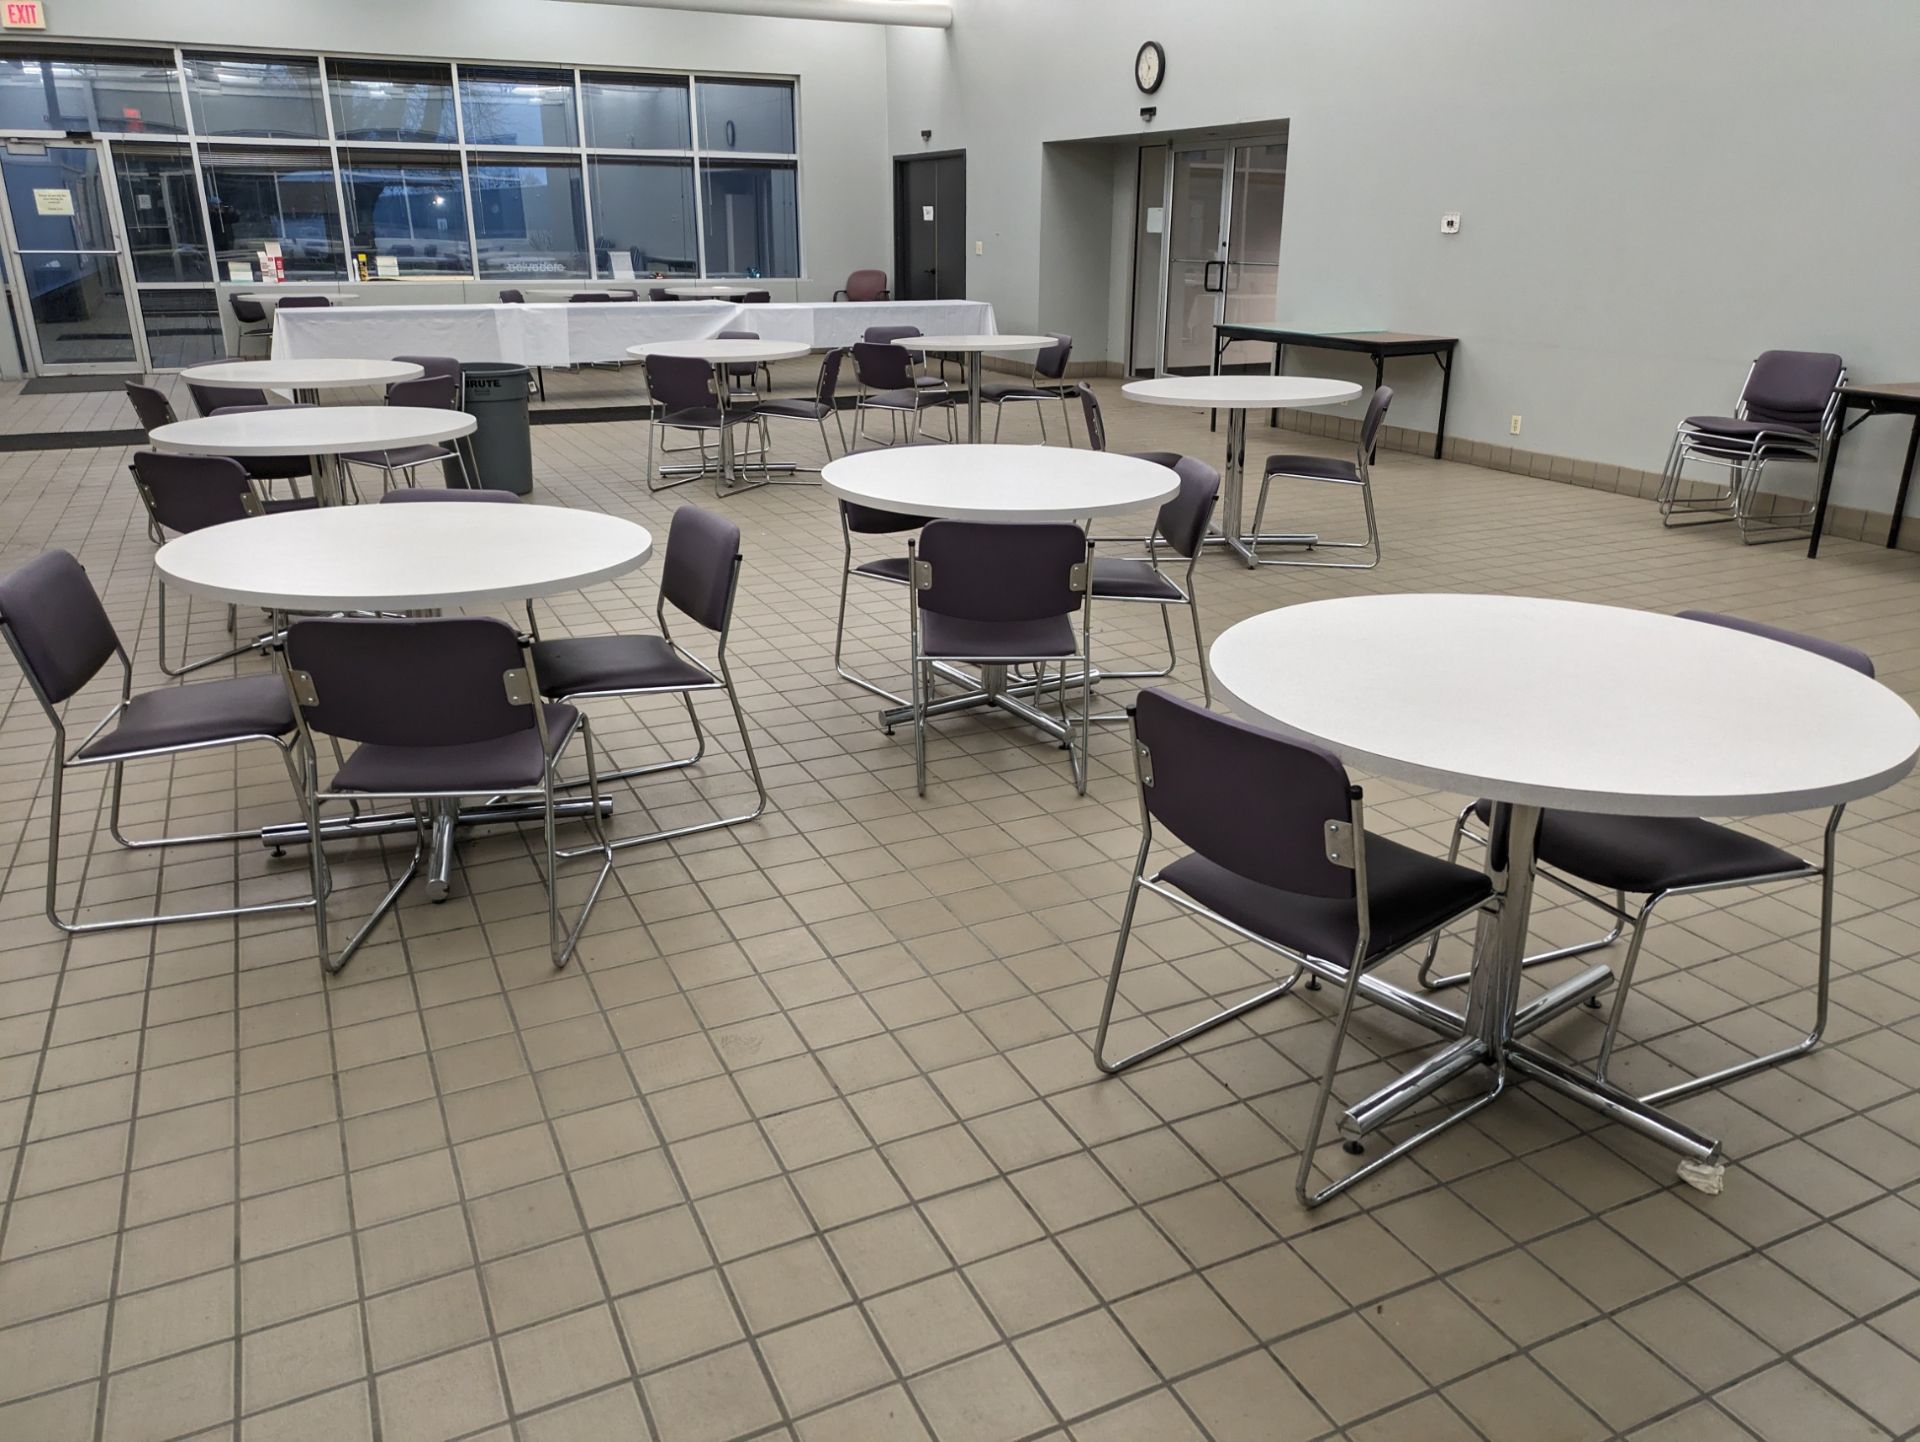 Lot of Cafeteria Furniture - Image 4 of 4